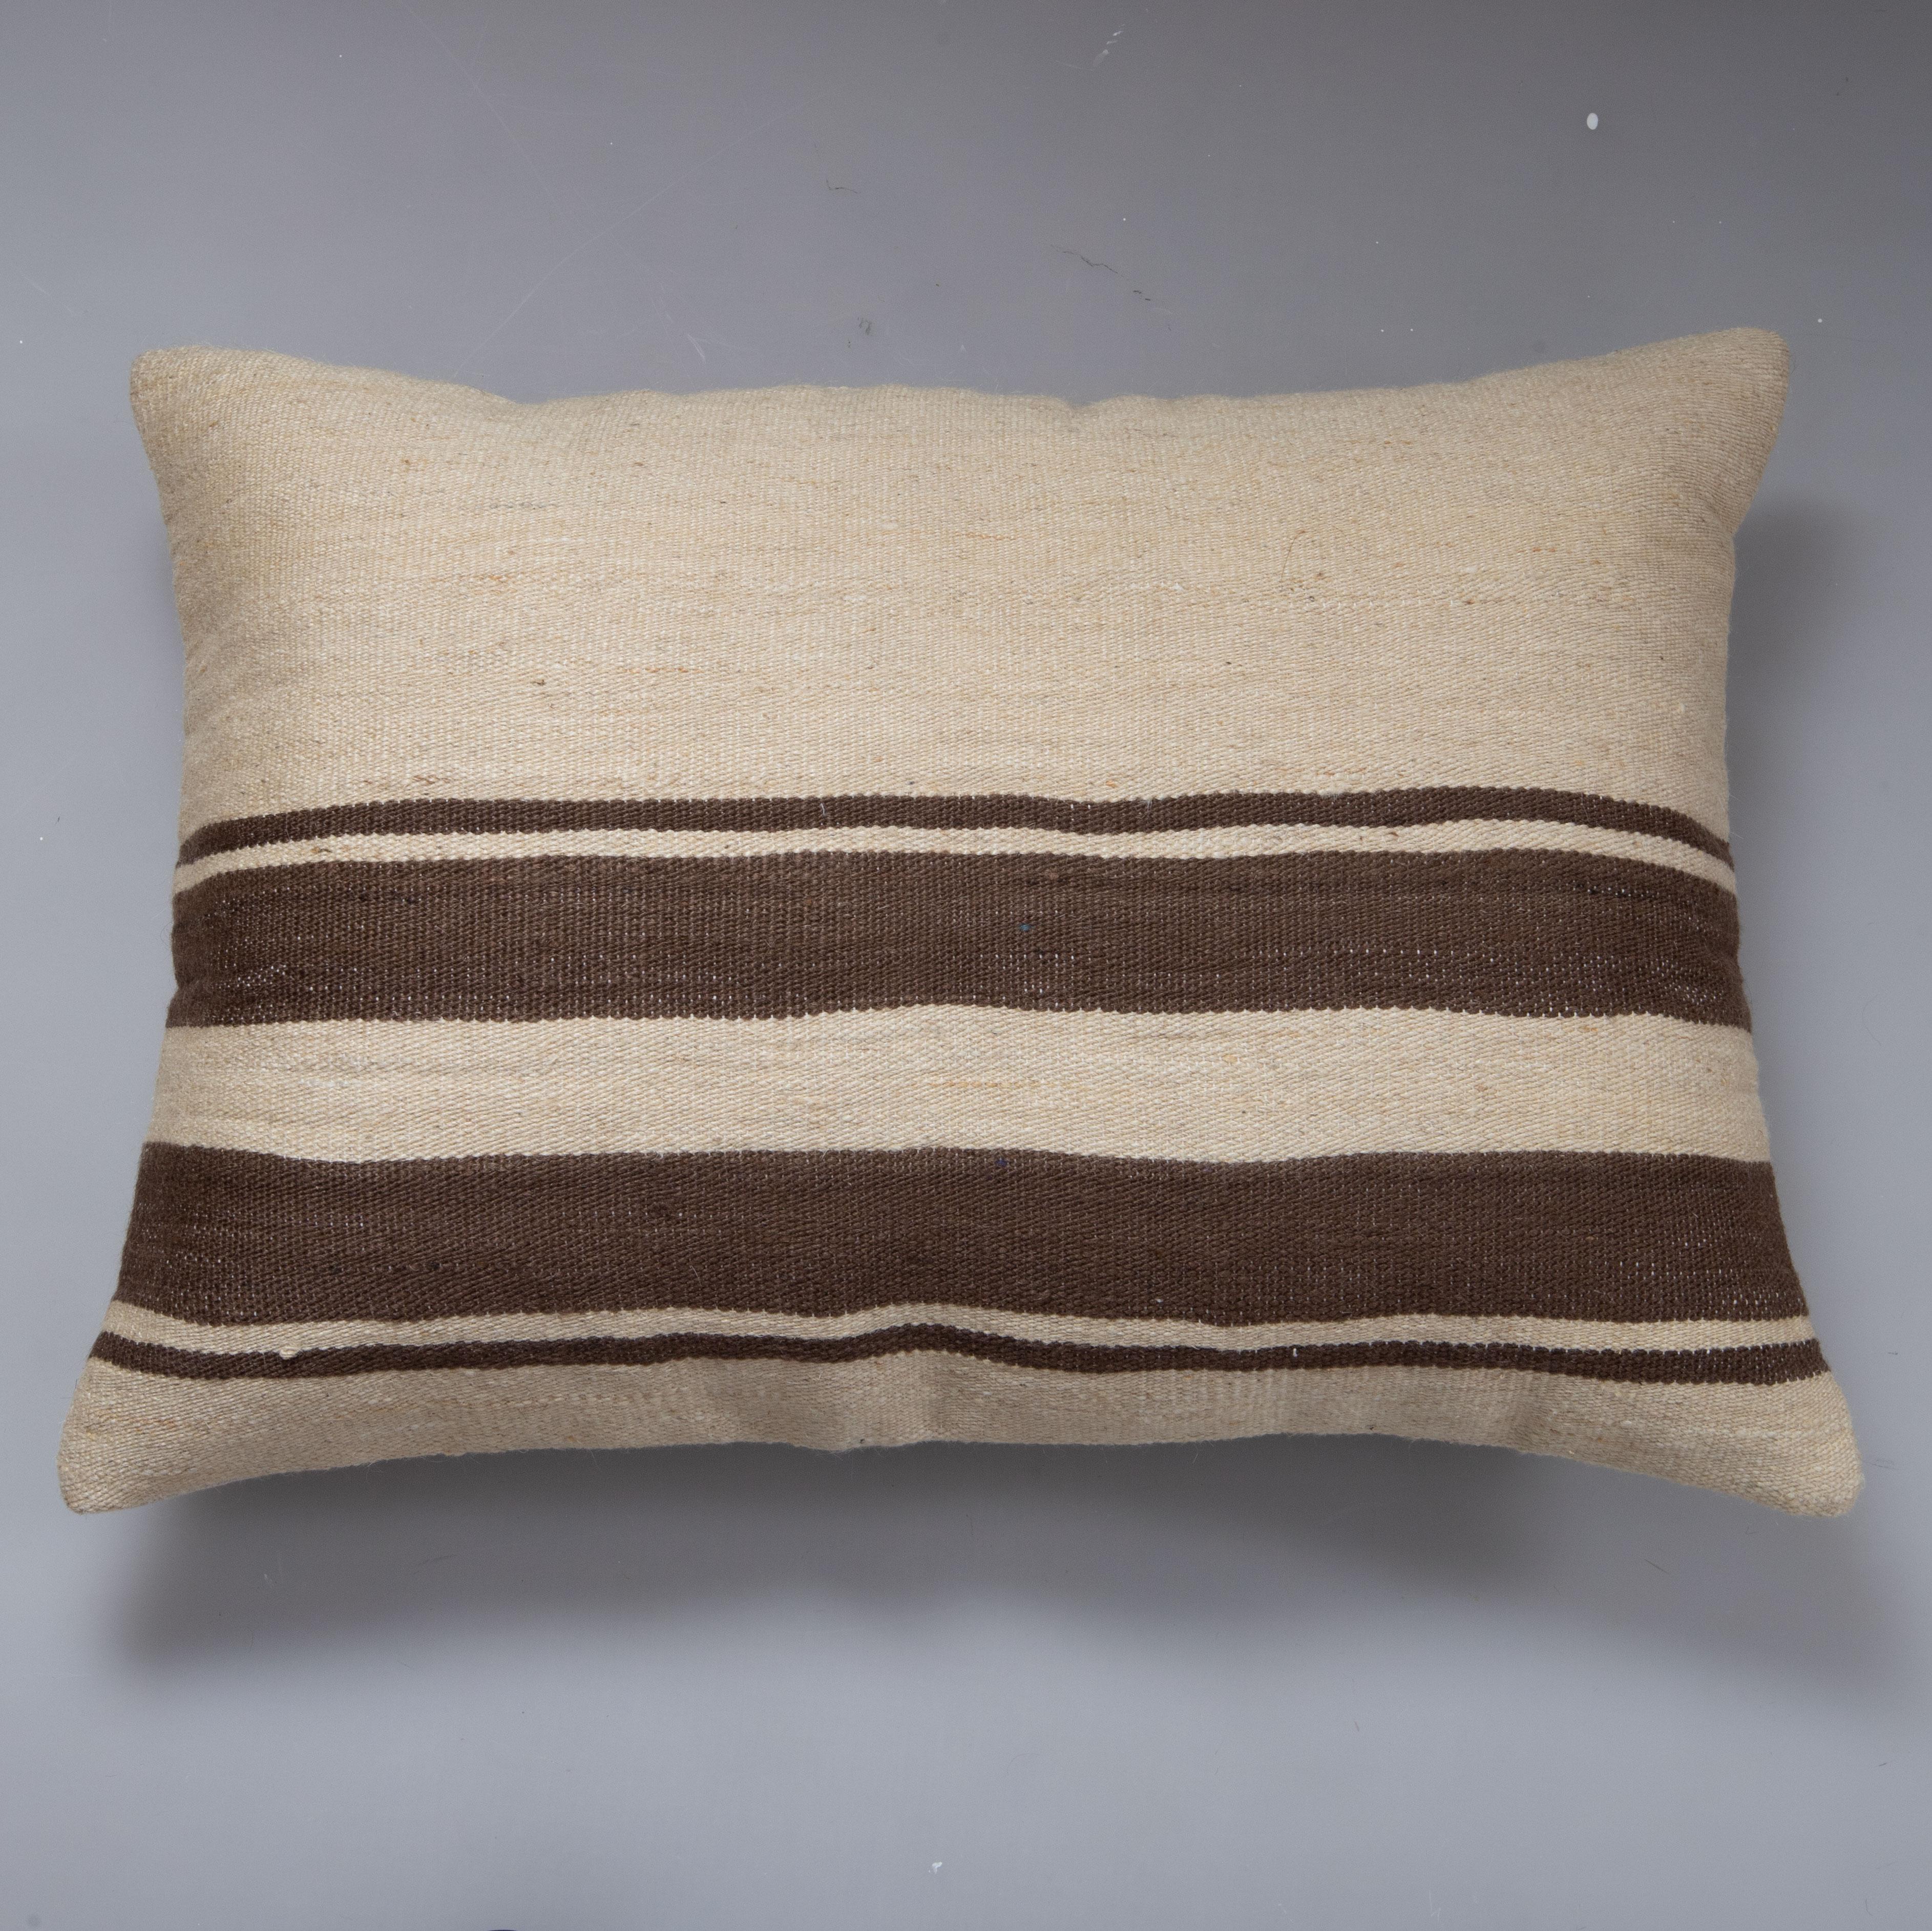 Angora/ Mohair Siirt Blanket Pillow Cover, 1960s/70s In Good Condition For Sale In Istanbul, TR